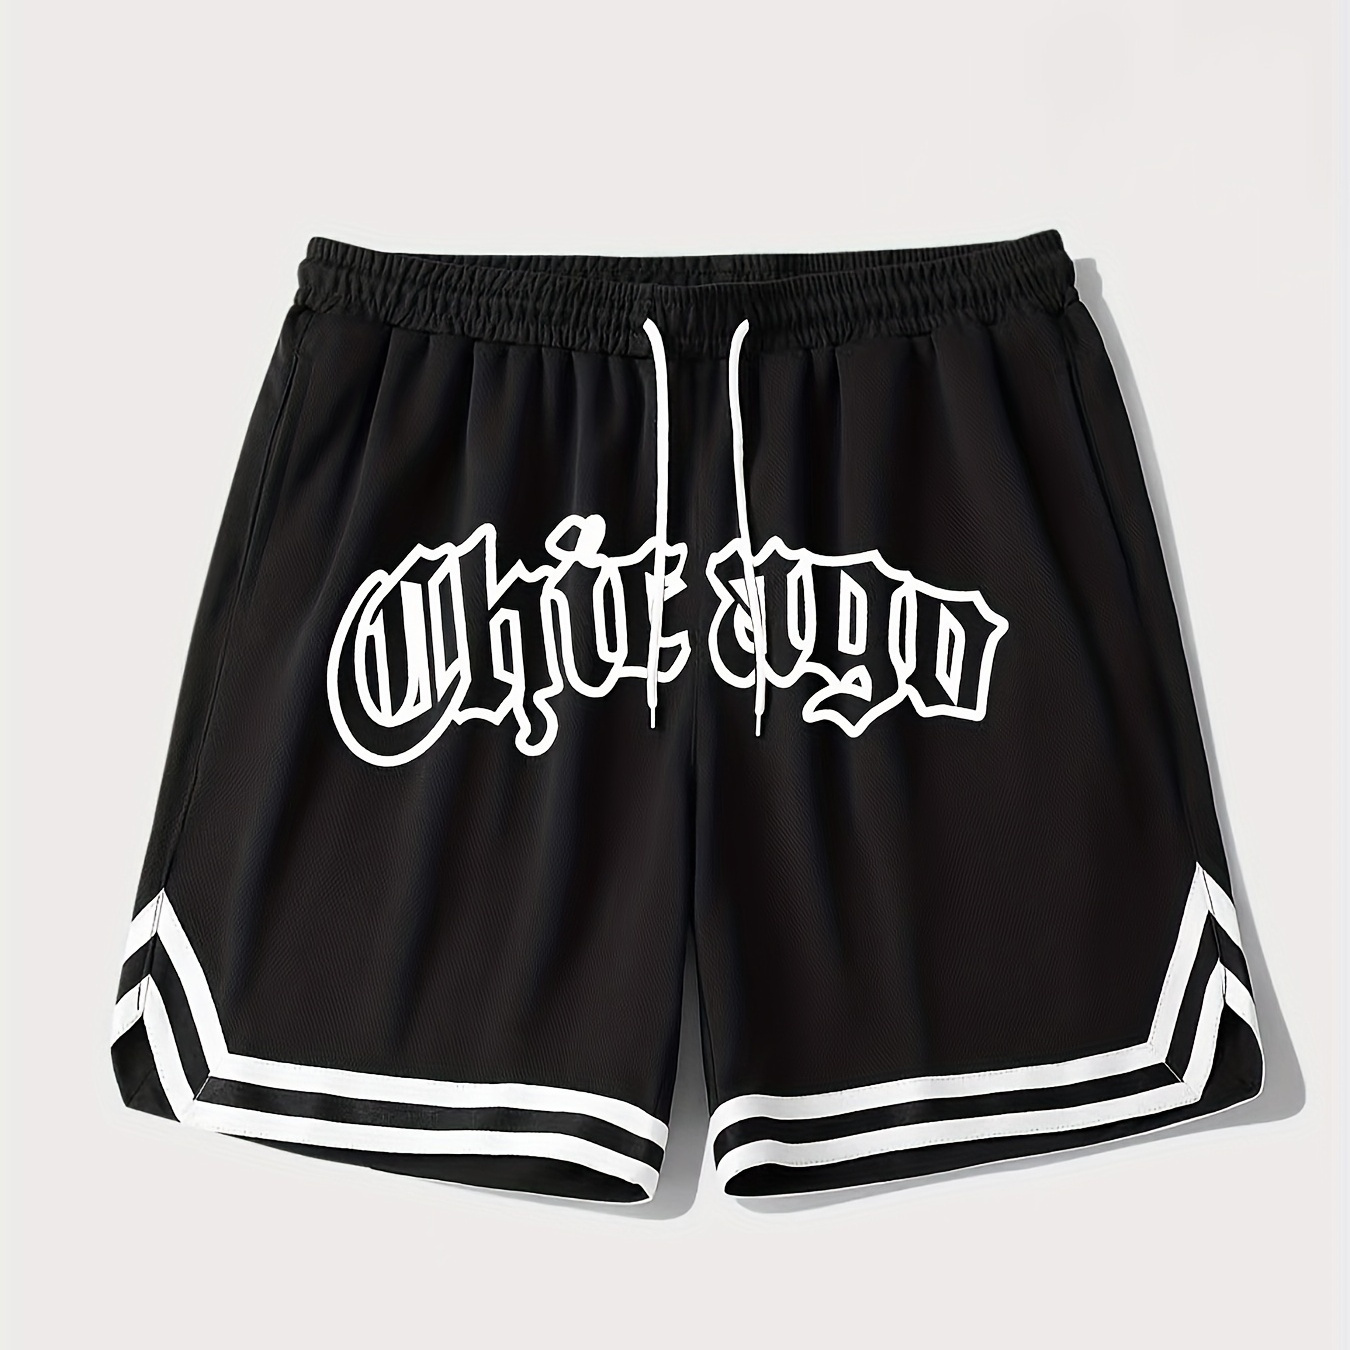 

Letter Print Chevron Quick Drying Comfy Shorts, Men's Casual Waist Drawstring Shorts For Summer Gym Workout Training